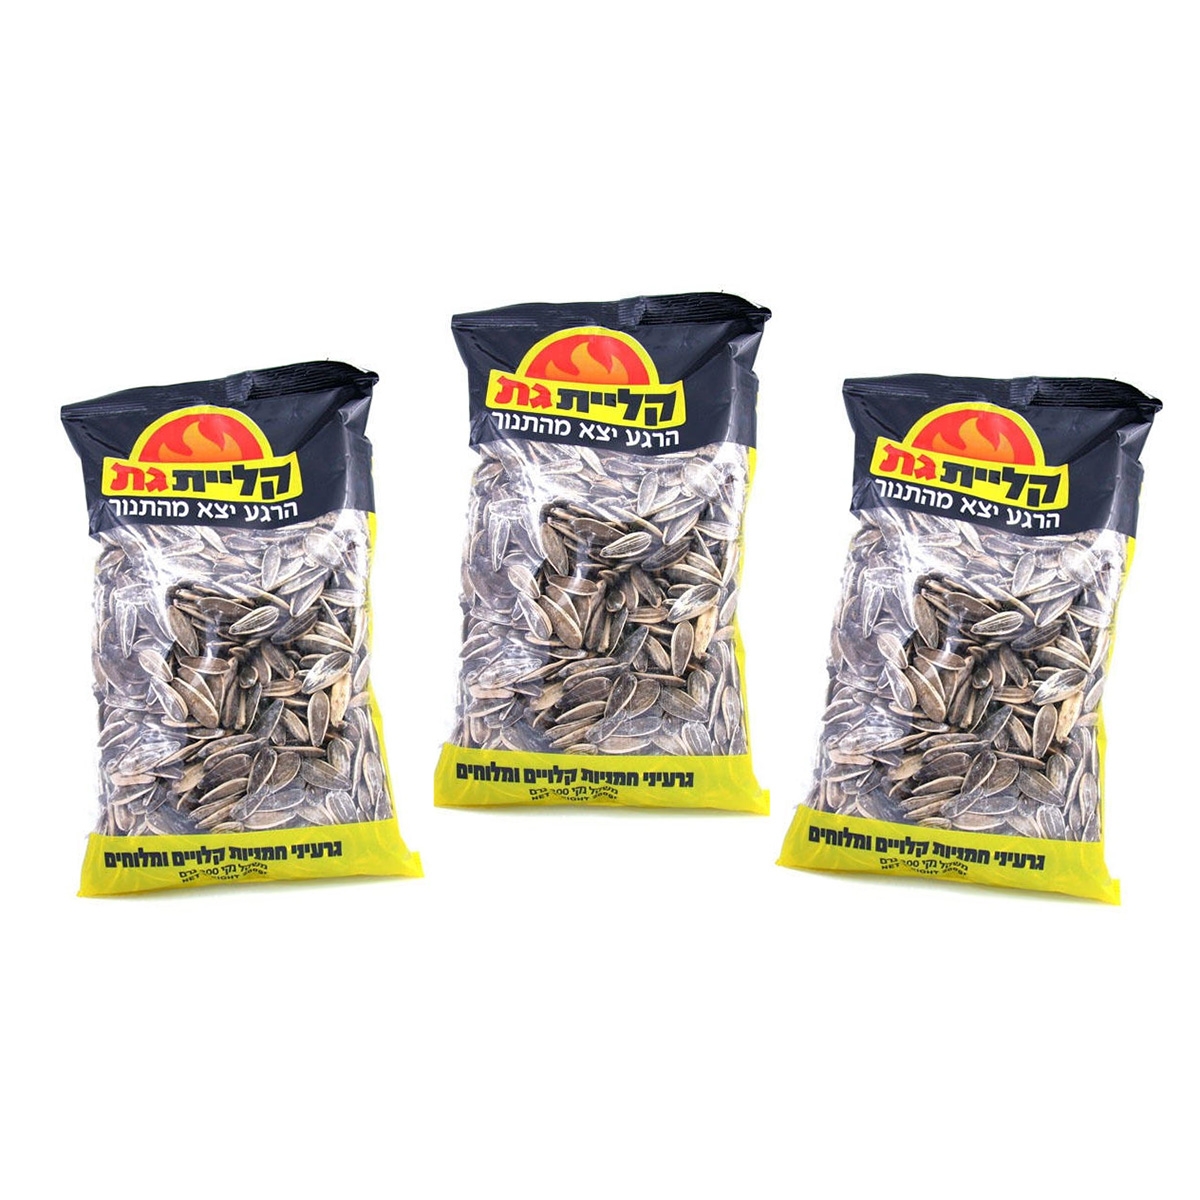  3 Pack of Roasted and Salted Sunflower Seeds - 1